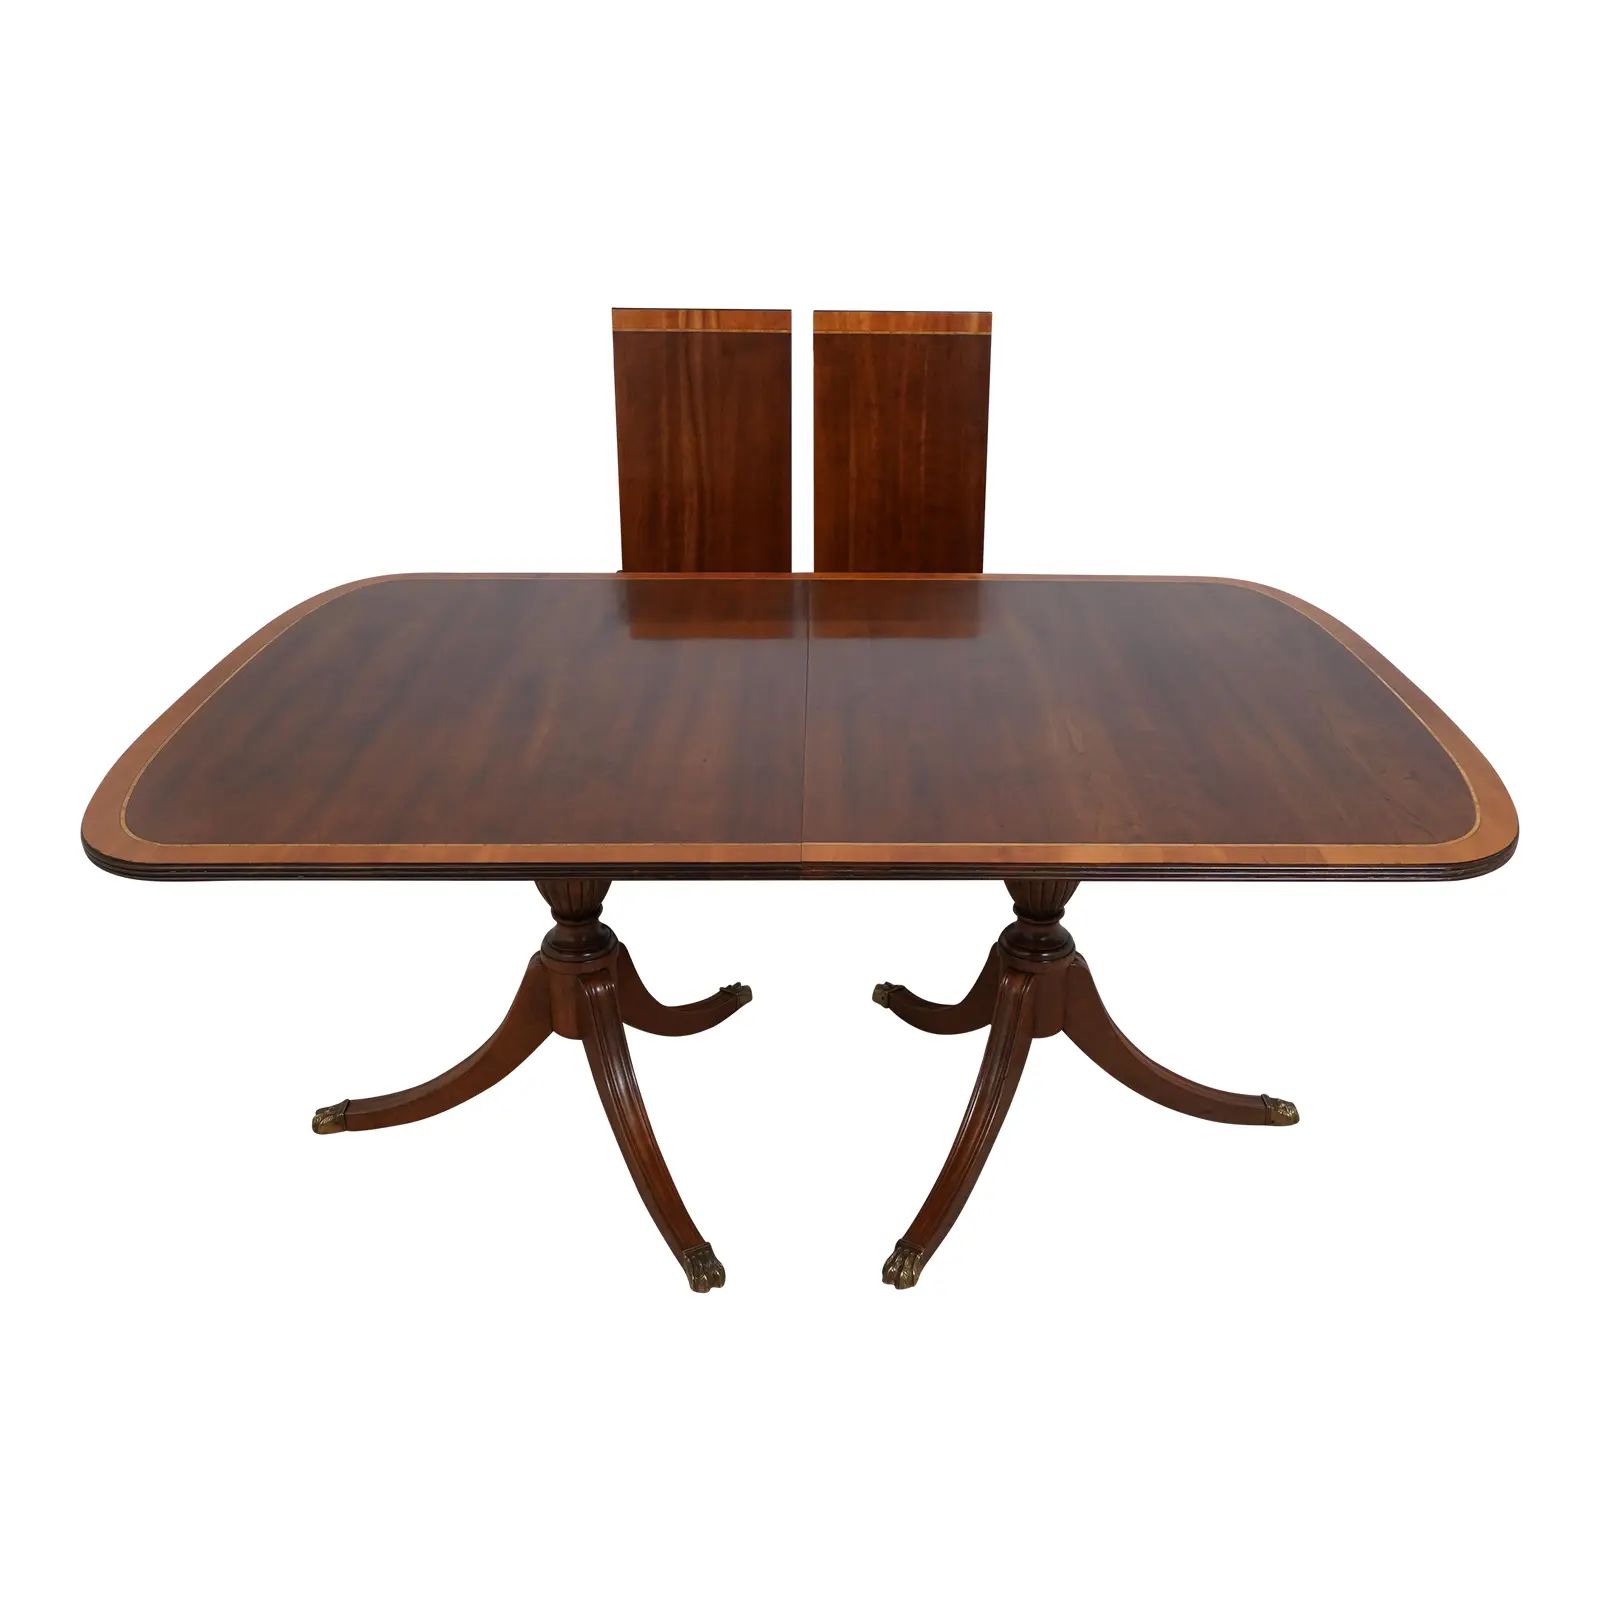 Stickley Banded Border Cherry Dining Room Table | Chairish